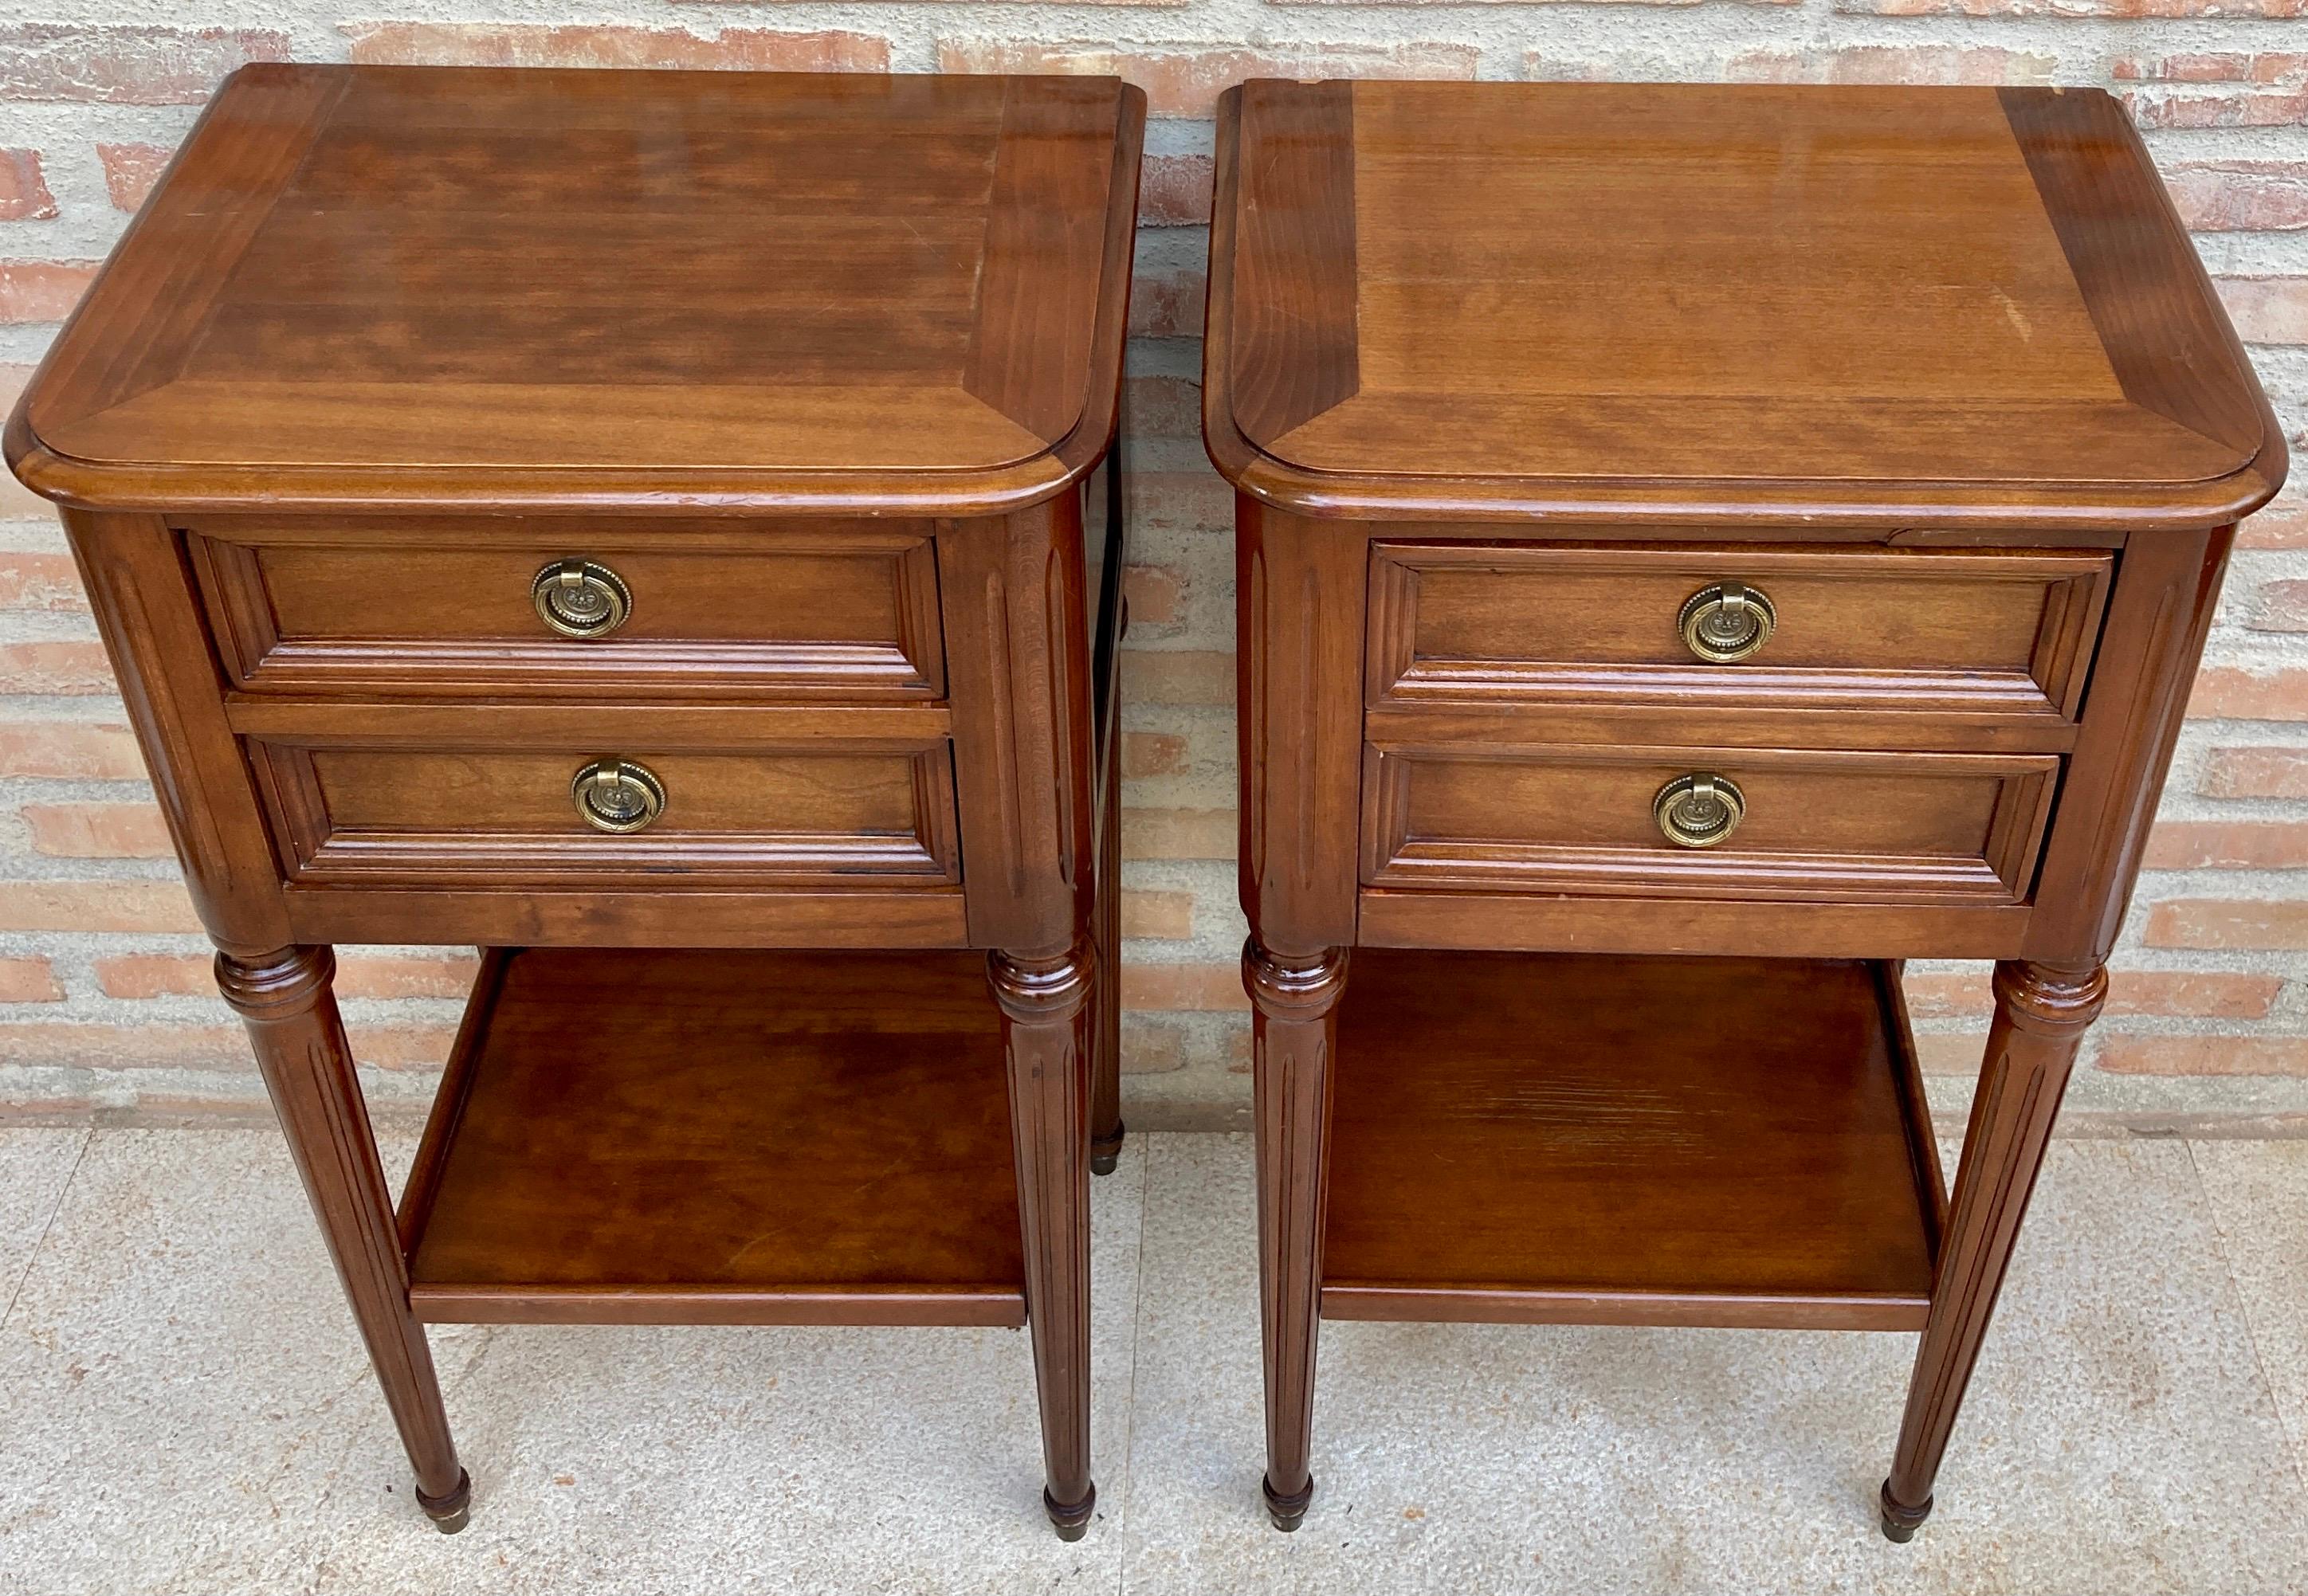 20th Century Pair of Mid-Century French Walnut Nightstands with Two Drawers and One Low Shelf